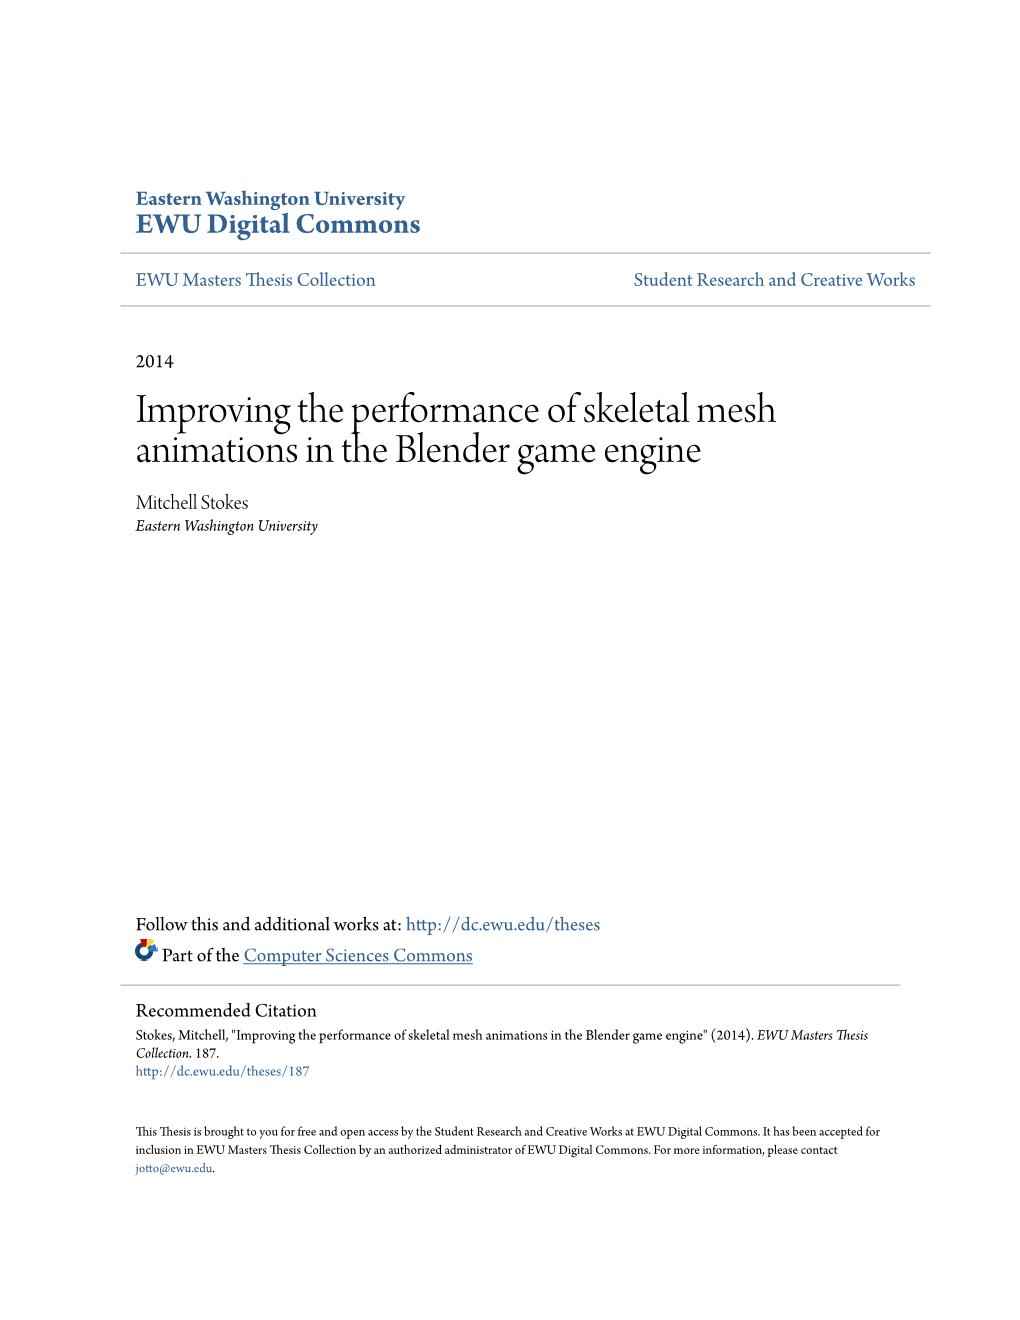 Improving the Performance of Skeletal Mesh Animations in the Blender Game Engine Mitchell Stokes Eastern Washington University